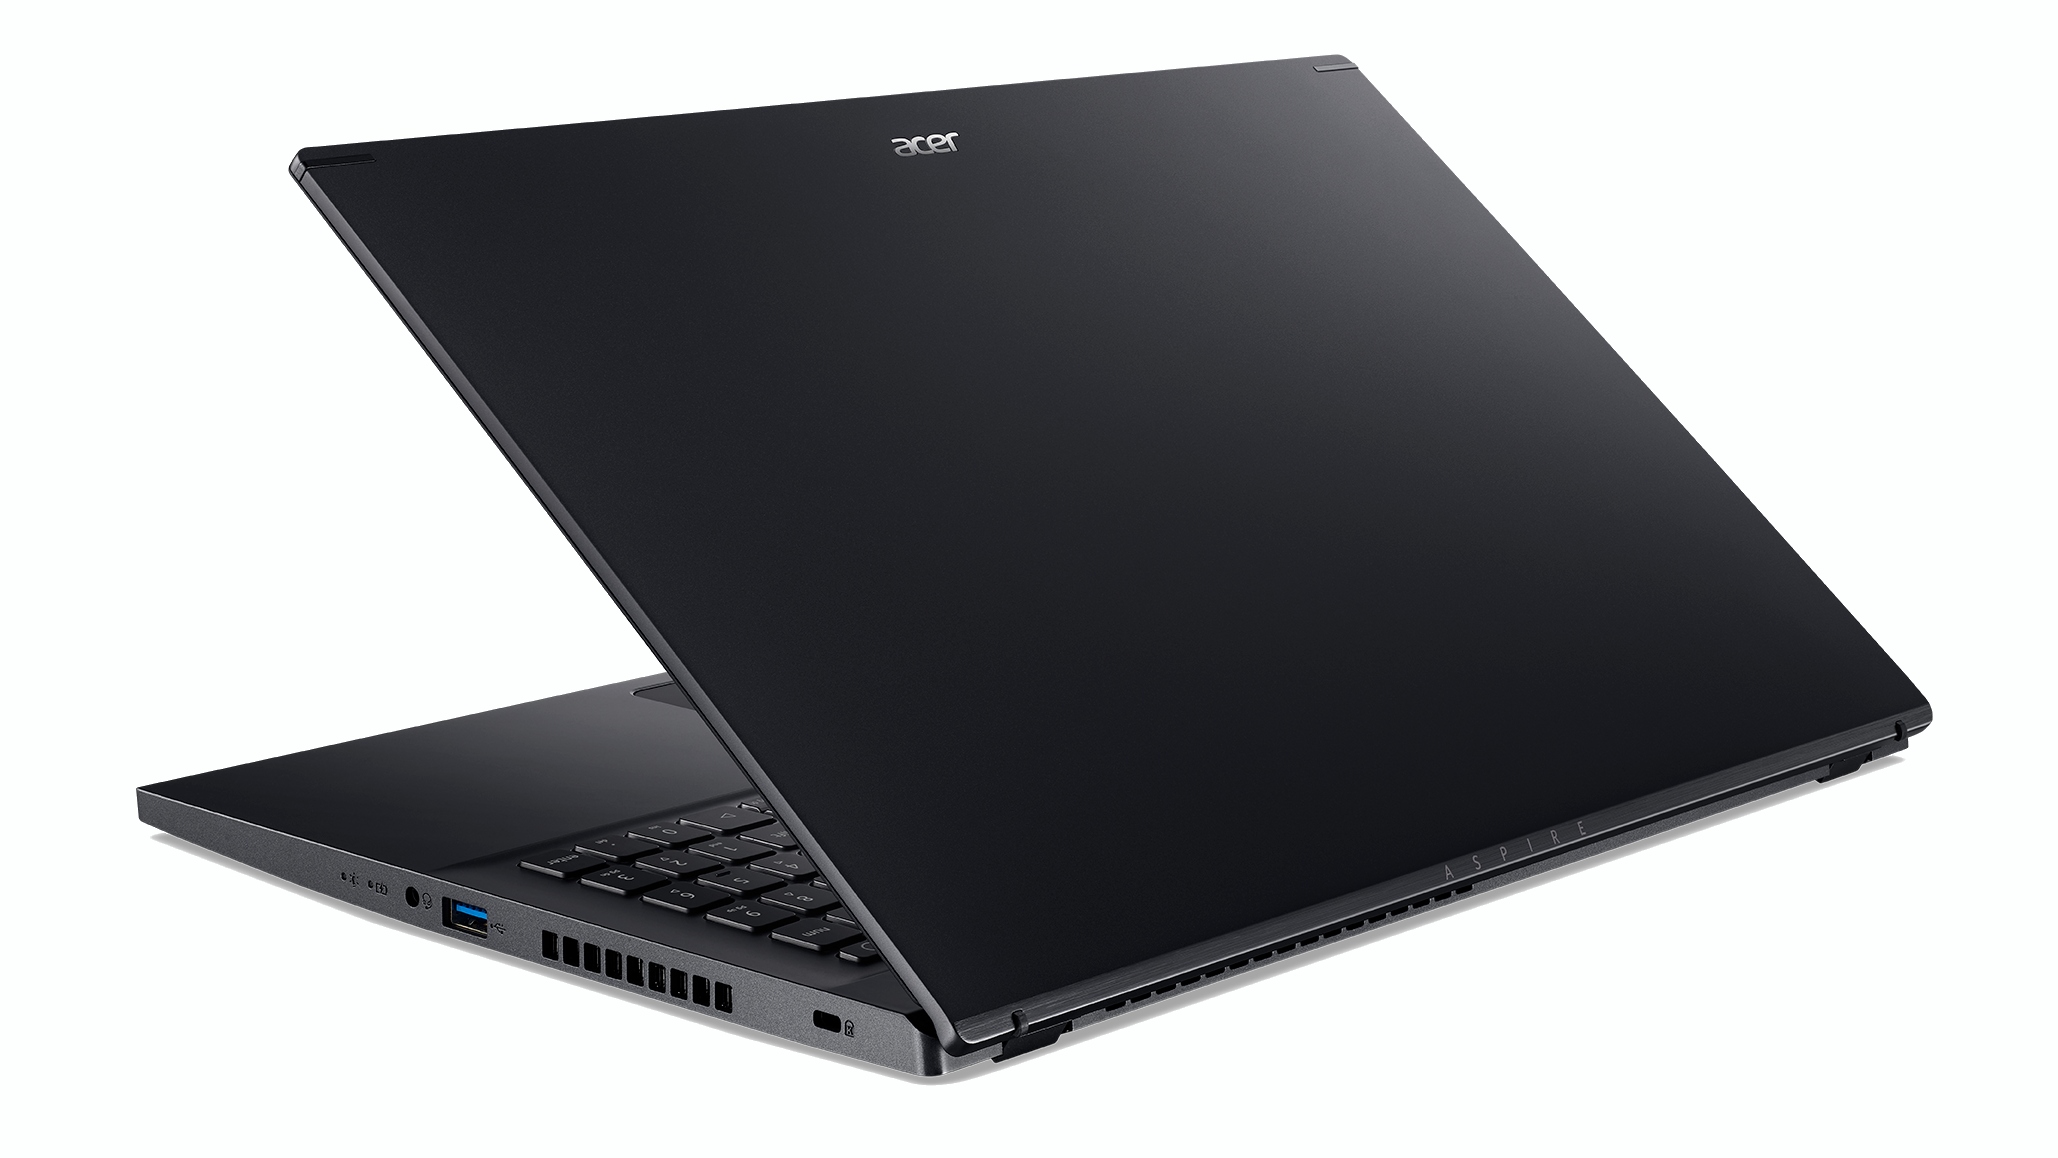 Acer Aspire 7 budget gaming laptop launched in India